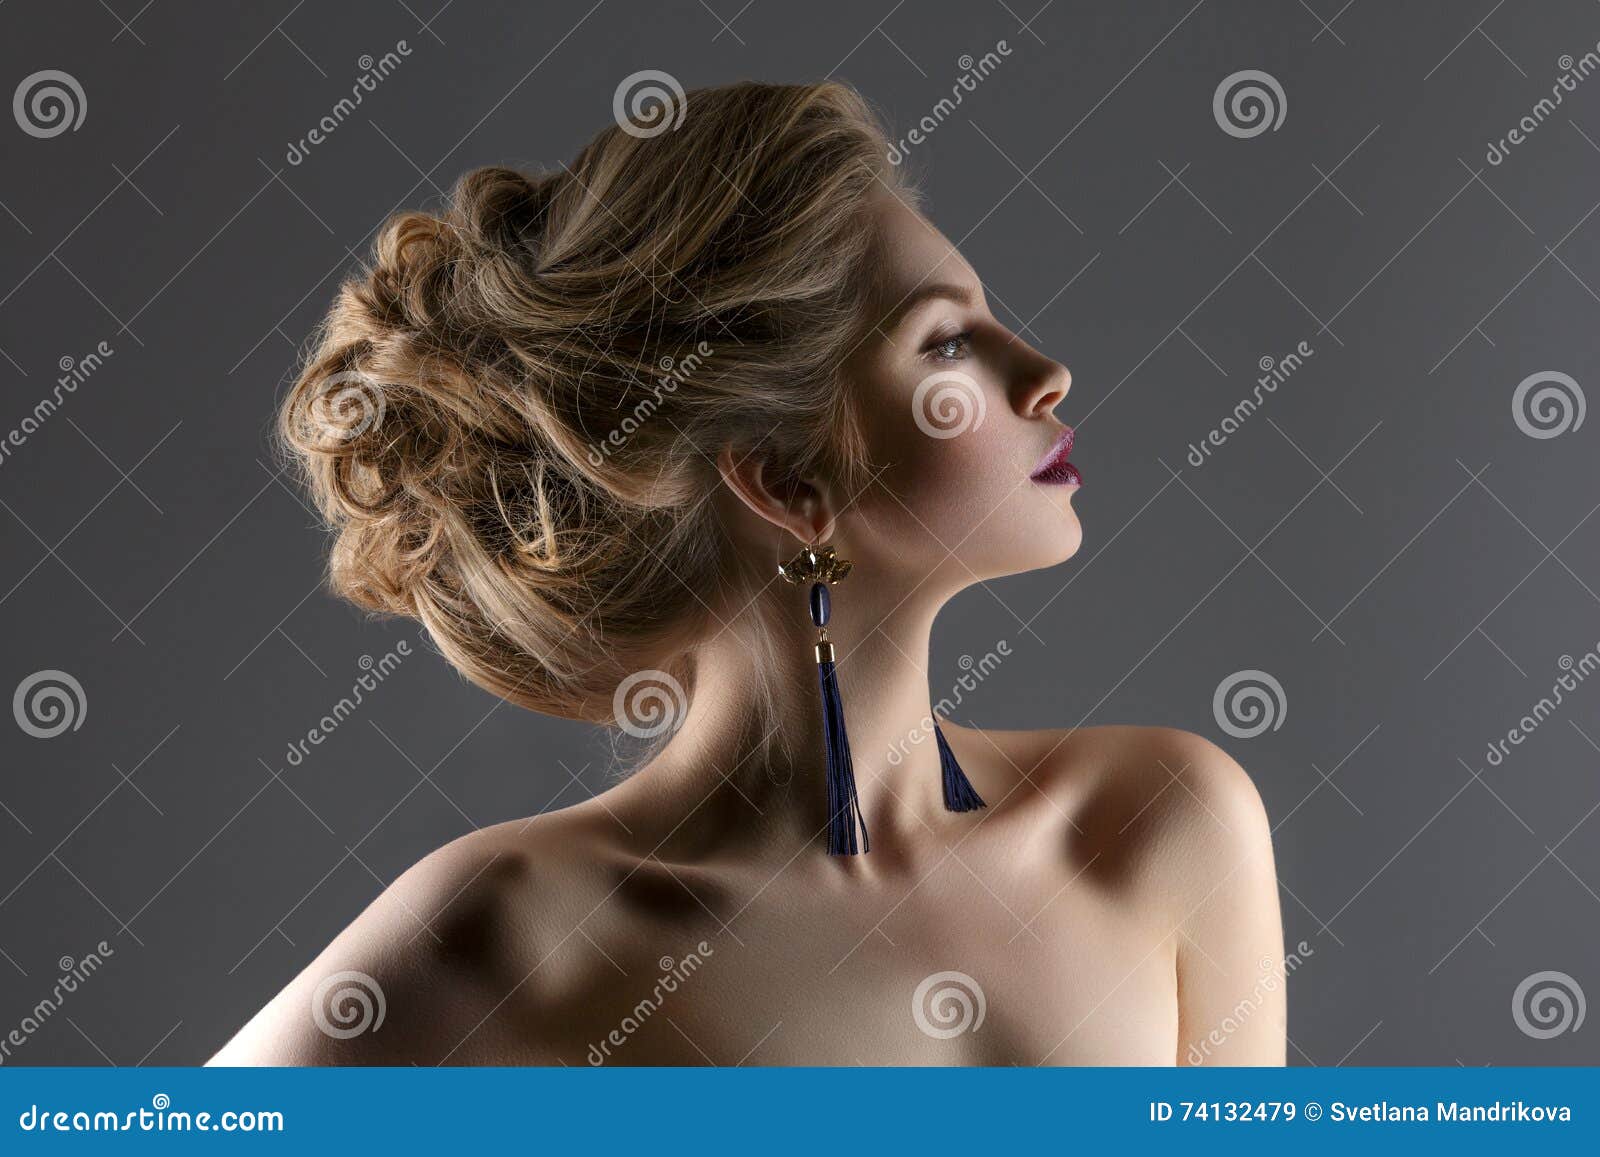 Beautiful Girl with Long Neck Stock Image - Image of bright, head